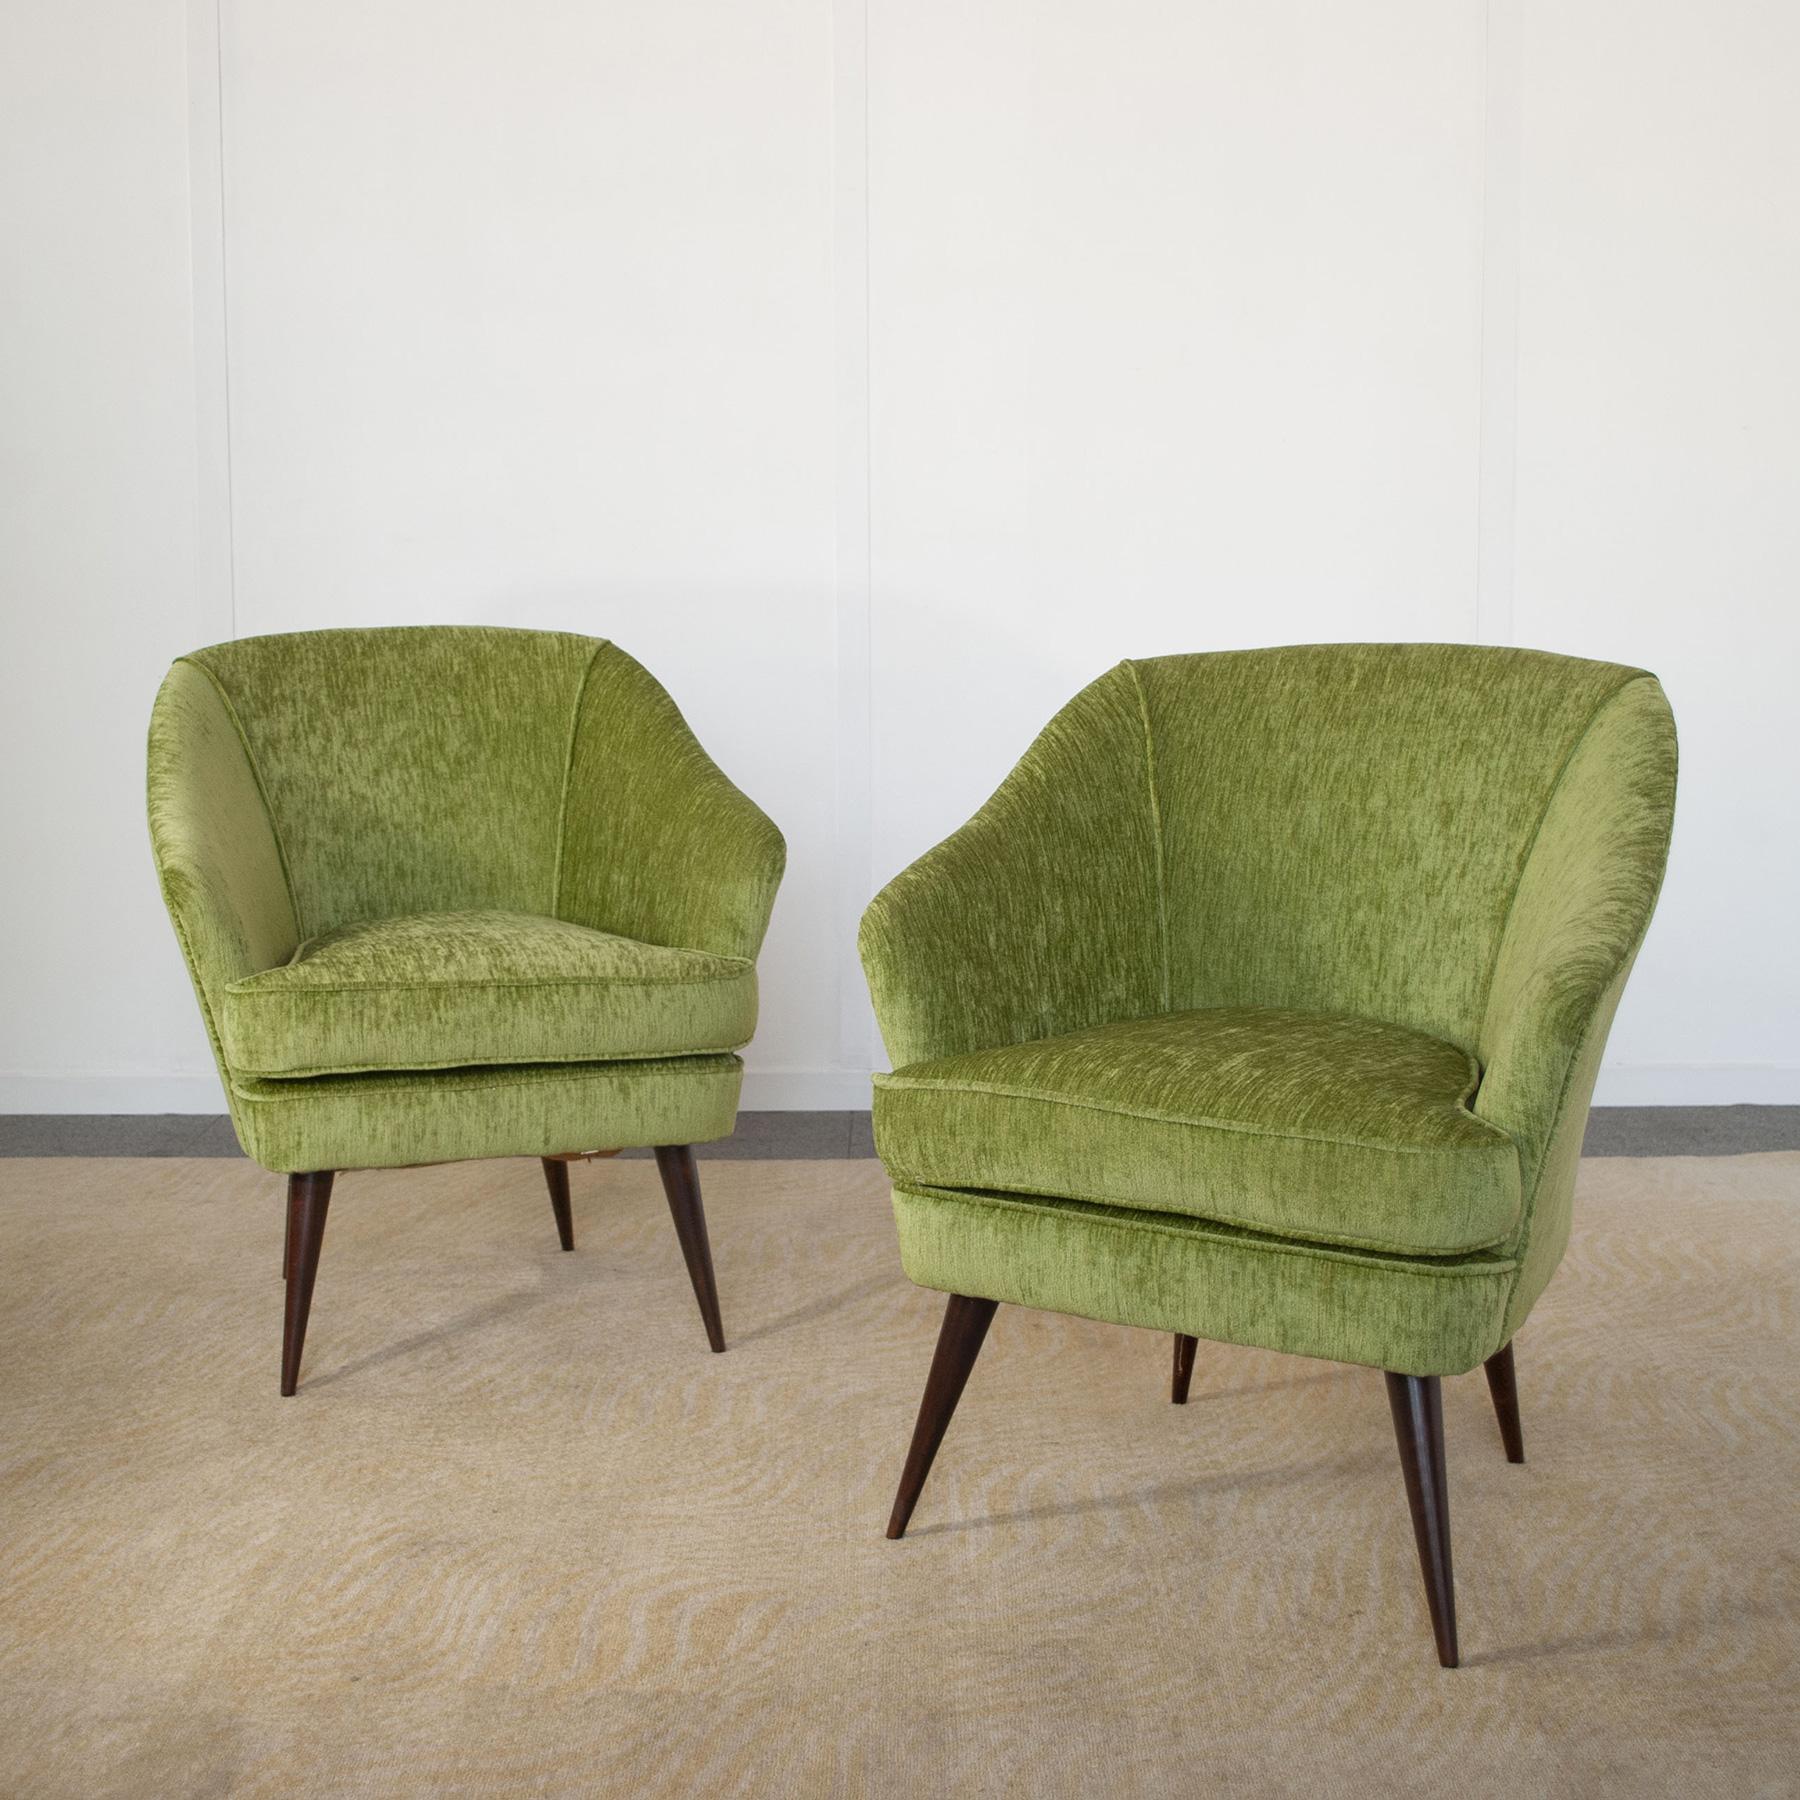 Mid-20th Century Set of two armchairs manufactured by Casa e Giardino designer Gio Ponti 1940 . For Sale